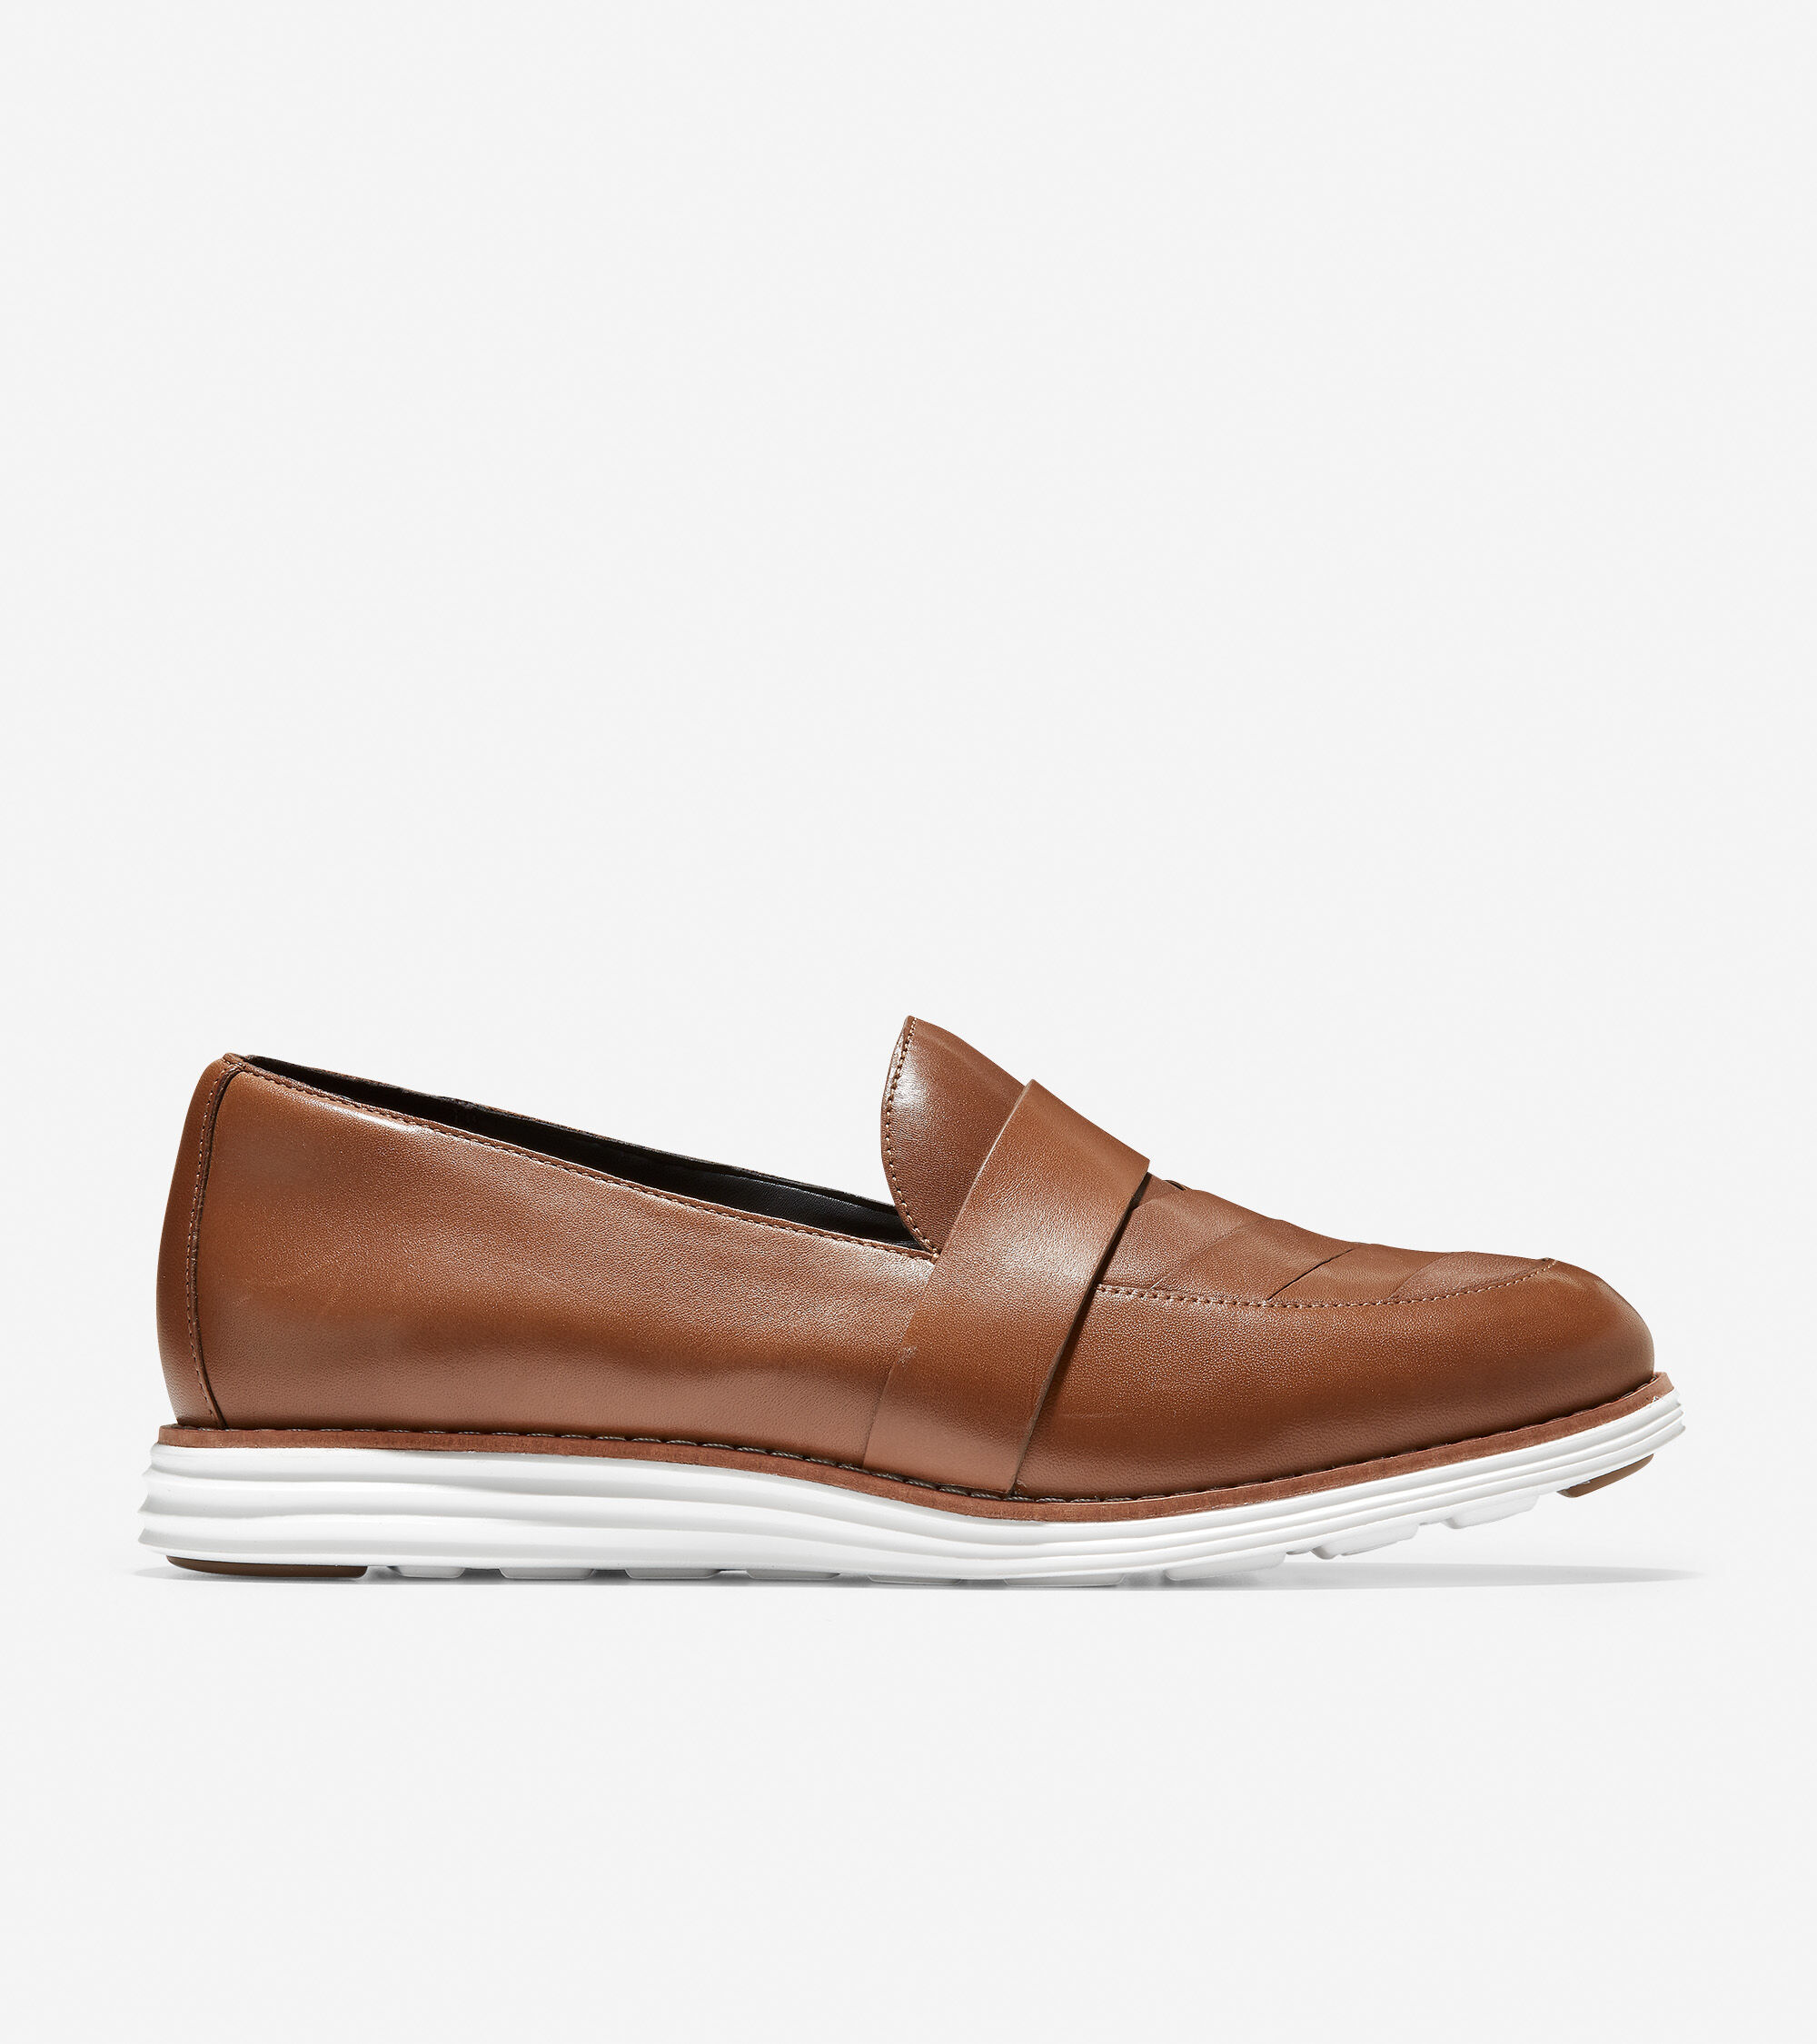 Loafer in Hazelnut Leather | Cole Haan